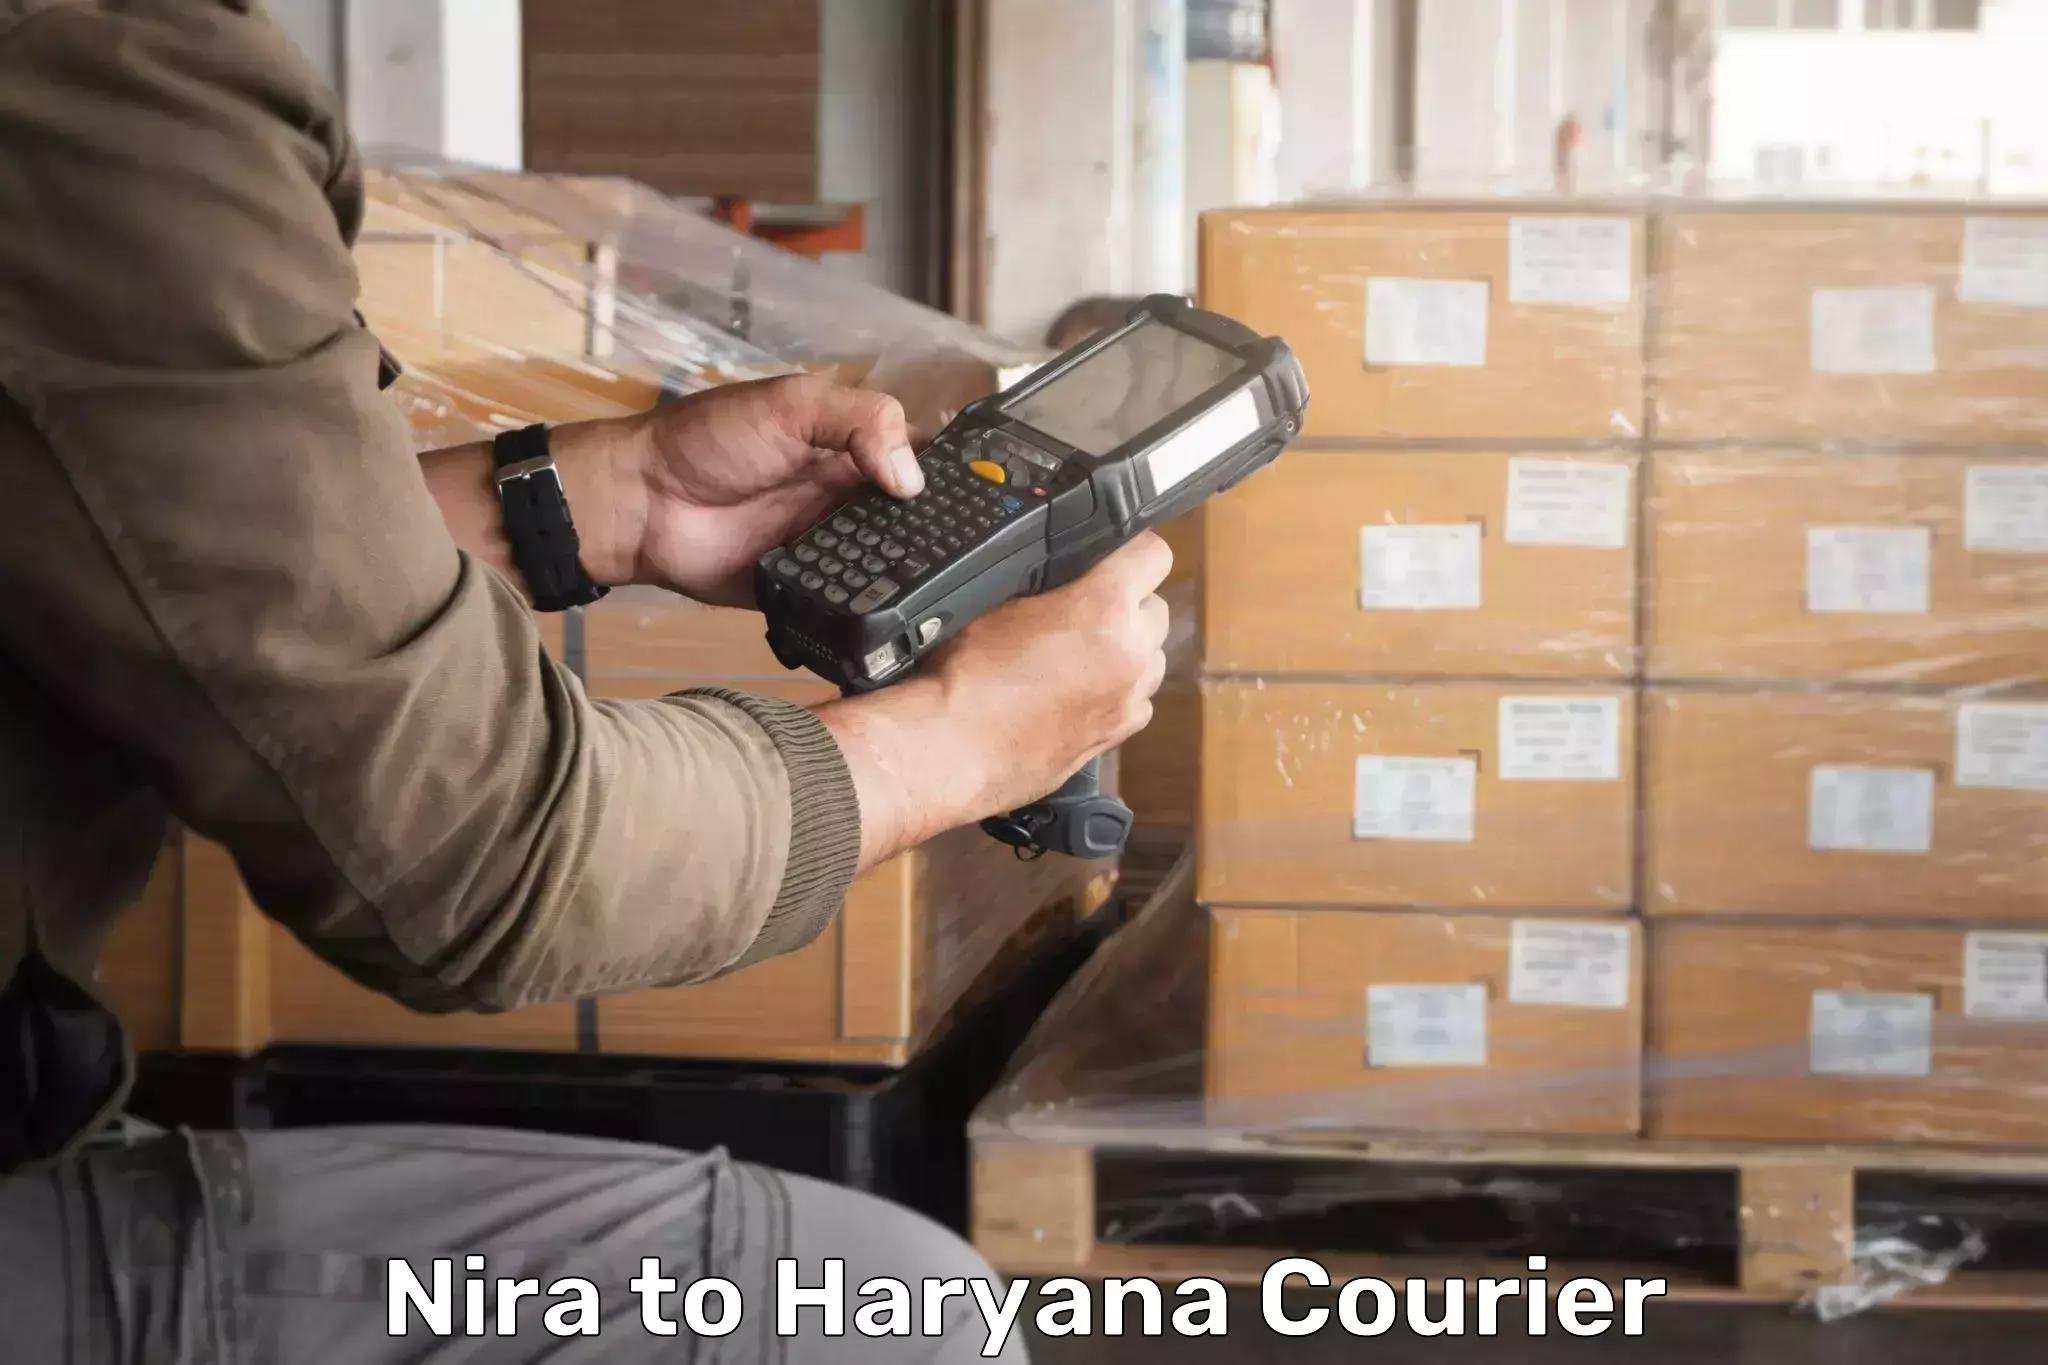 Nationwide courier service Nira to NCR Haryana